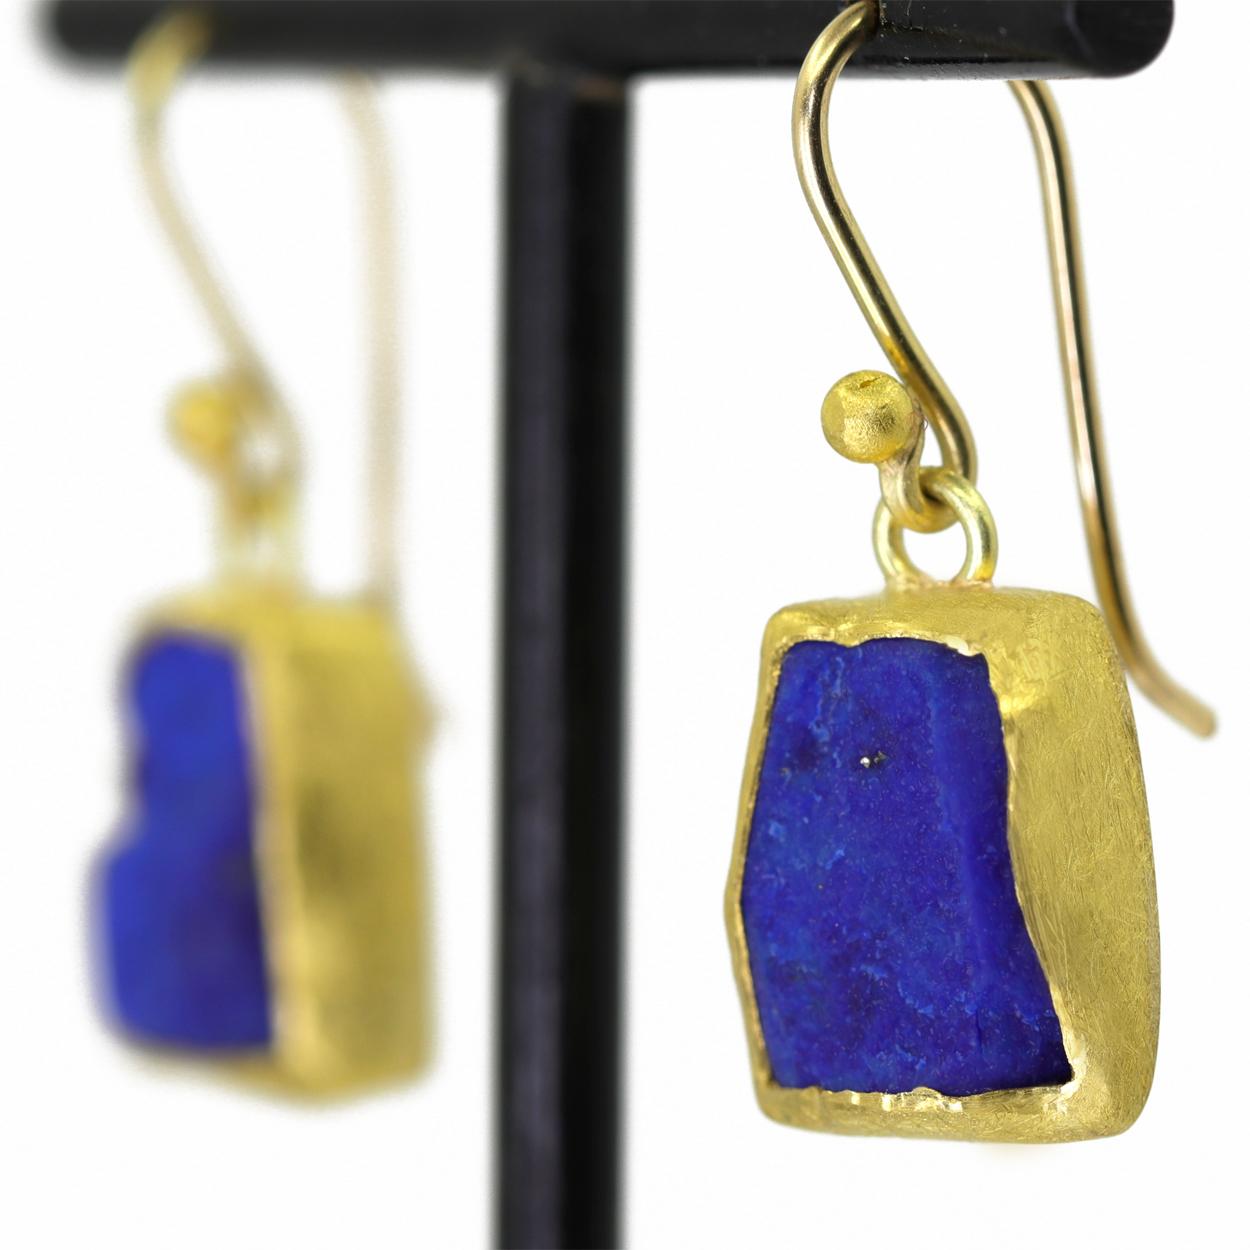 One of a Kind Rough Lapis Lazuli Drop Earrings handmade by acclaimed jewelry artist Petra Class showcasing a beautiful set of matched rough royal blue lapis lazuli, individually set in solid 22k yellow gold with the makers signature finish, and